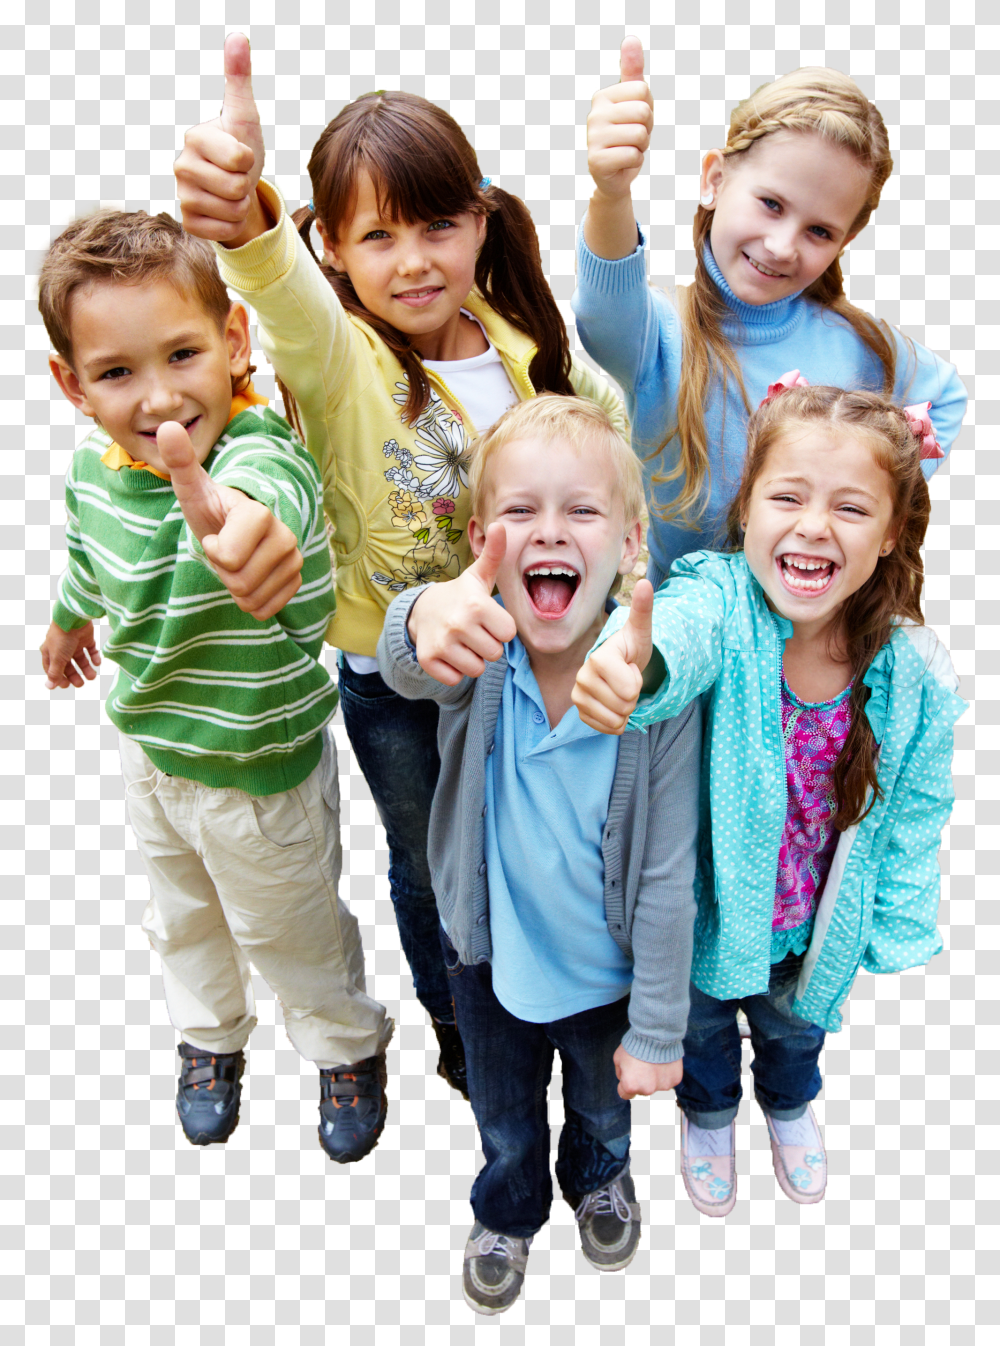 Thumbs Up Kid Kids Thumbs Up Transparent Png